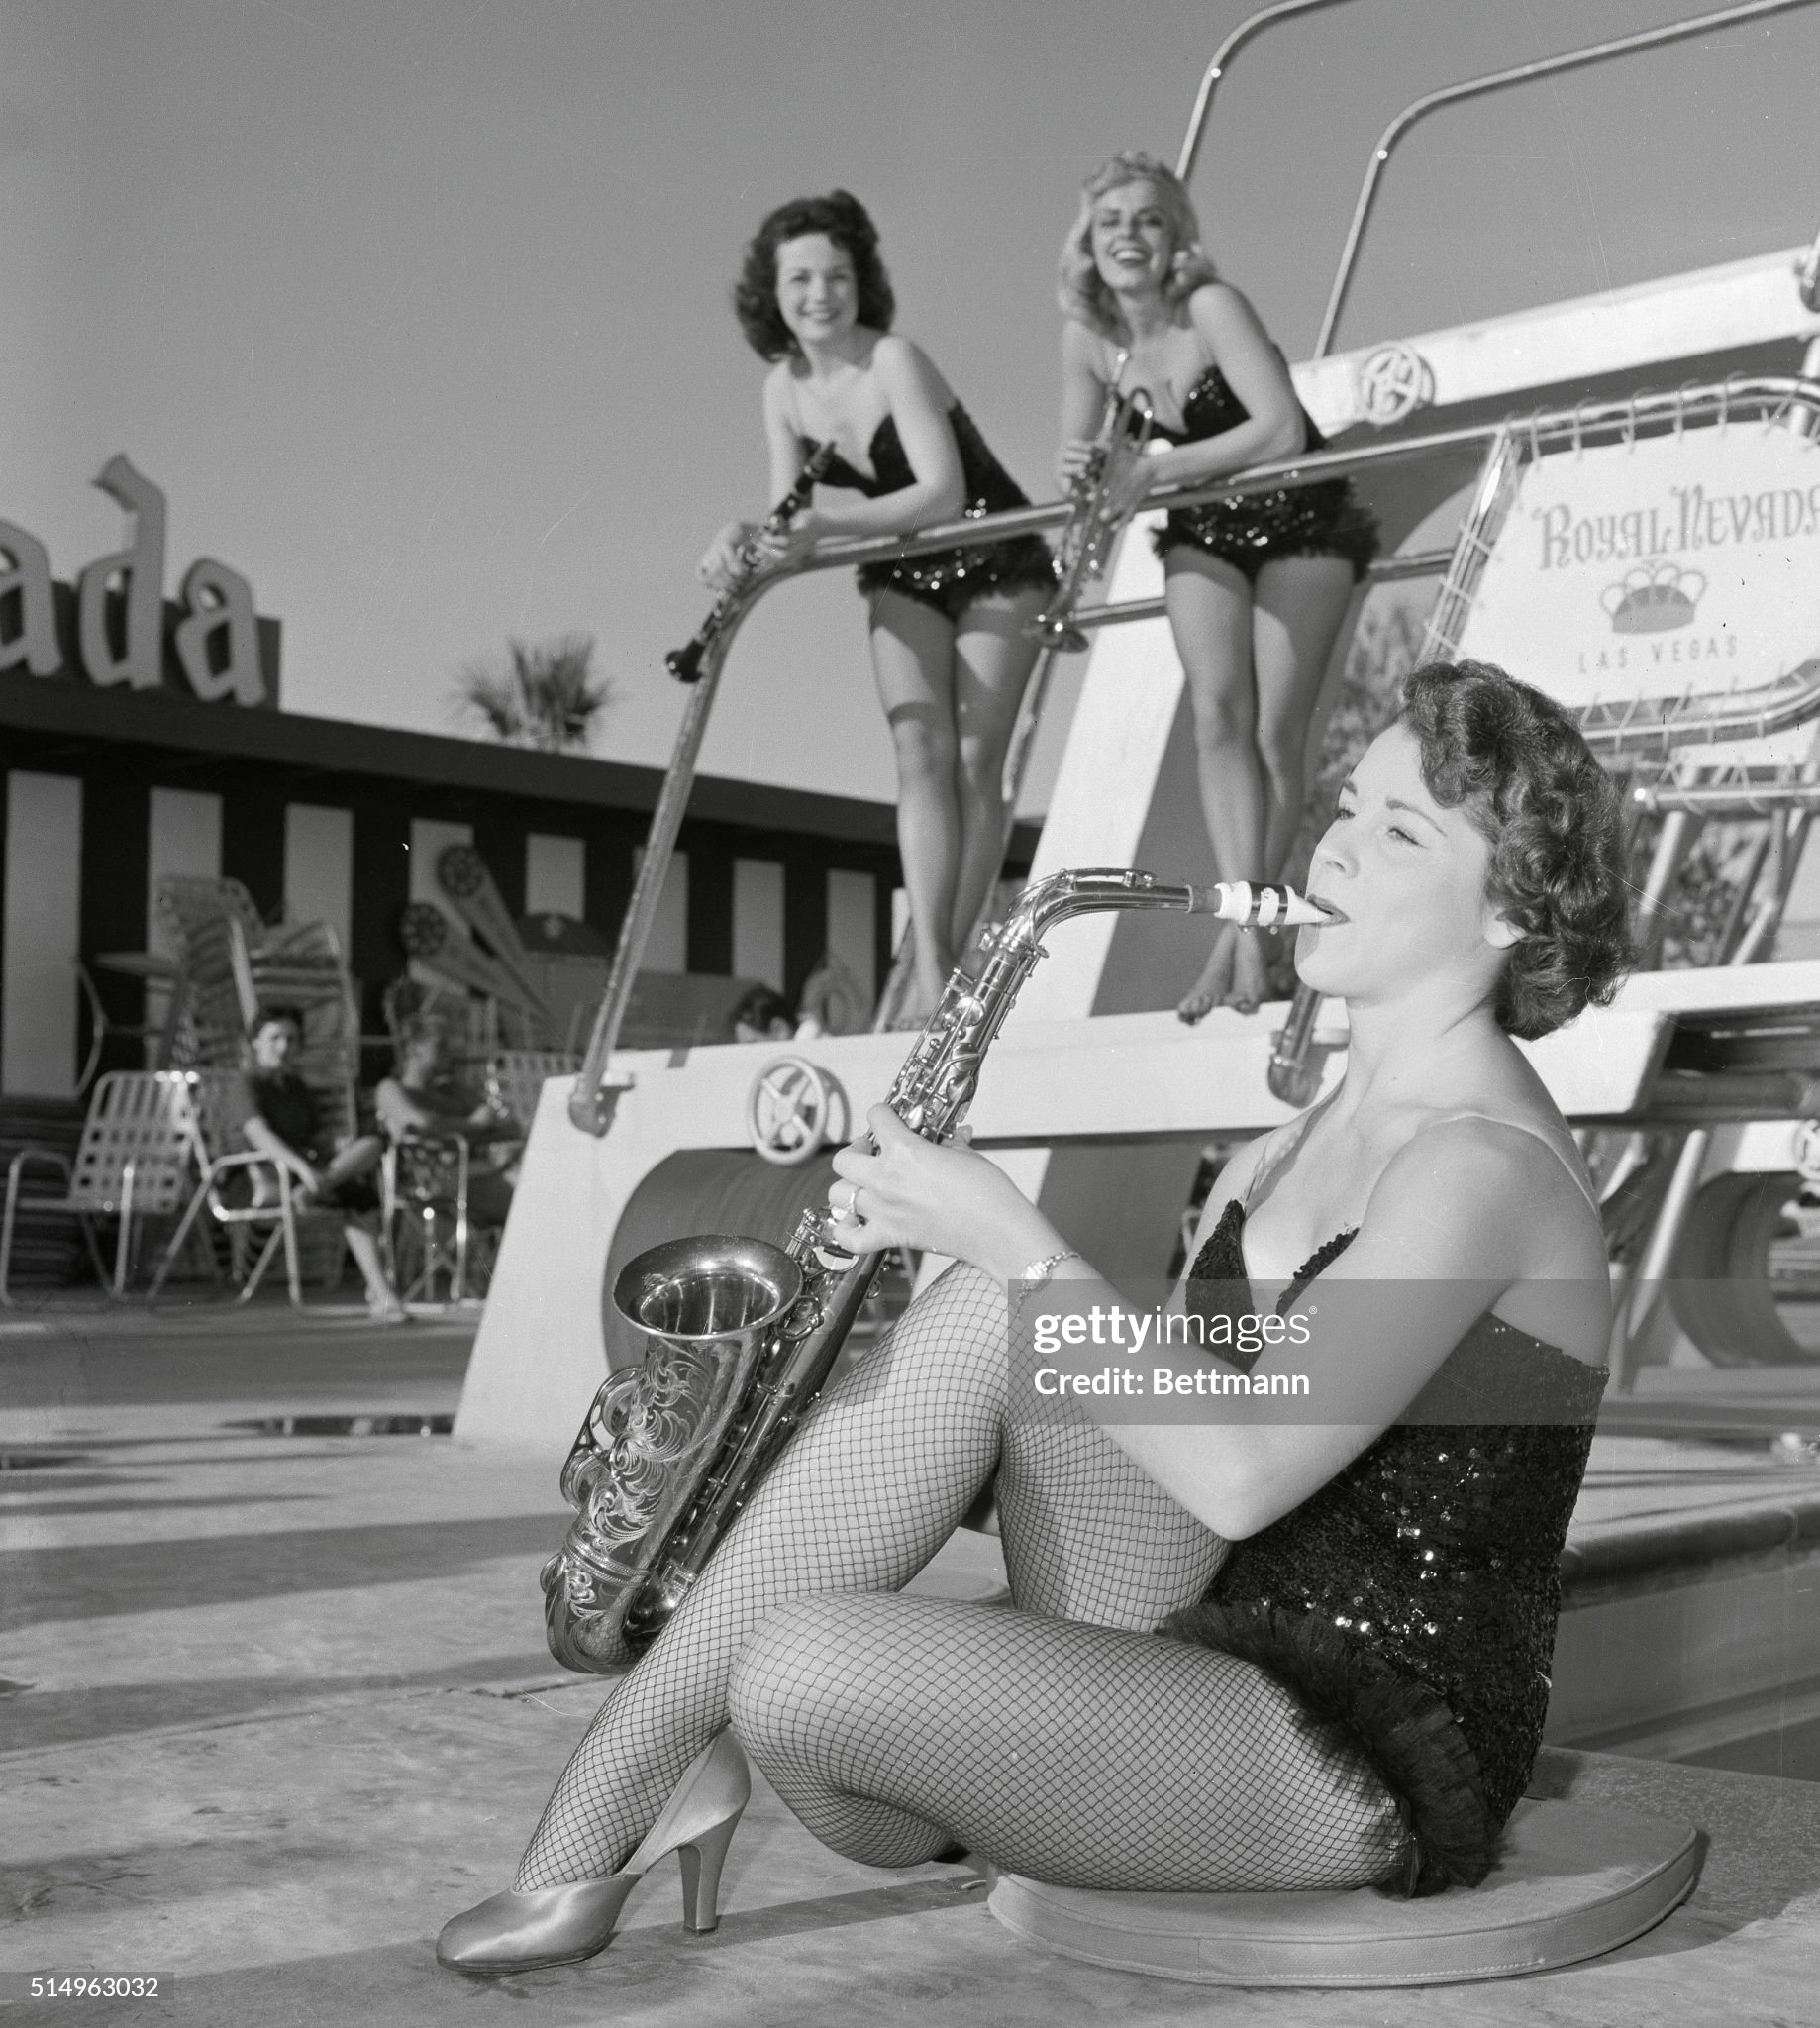 Tooting her sax in the sun at Las Vegas on 05 December 1955 is 19 year old Jessy De Roza, a member of Phil Spitalny's 20 piece all girl orchestra. Looking on as Jessy gets in some poolside practice are Rose Marie Krous, 19 (left) and Mary Ann Mazzocia, 21. All three musical beauties are from New York City.